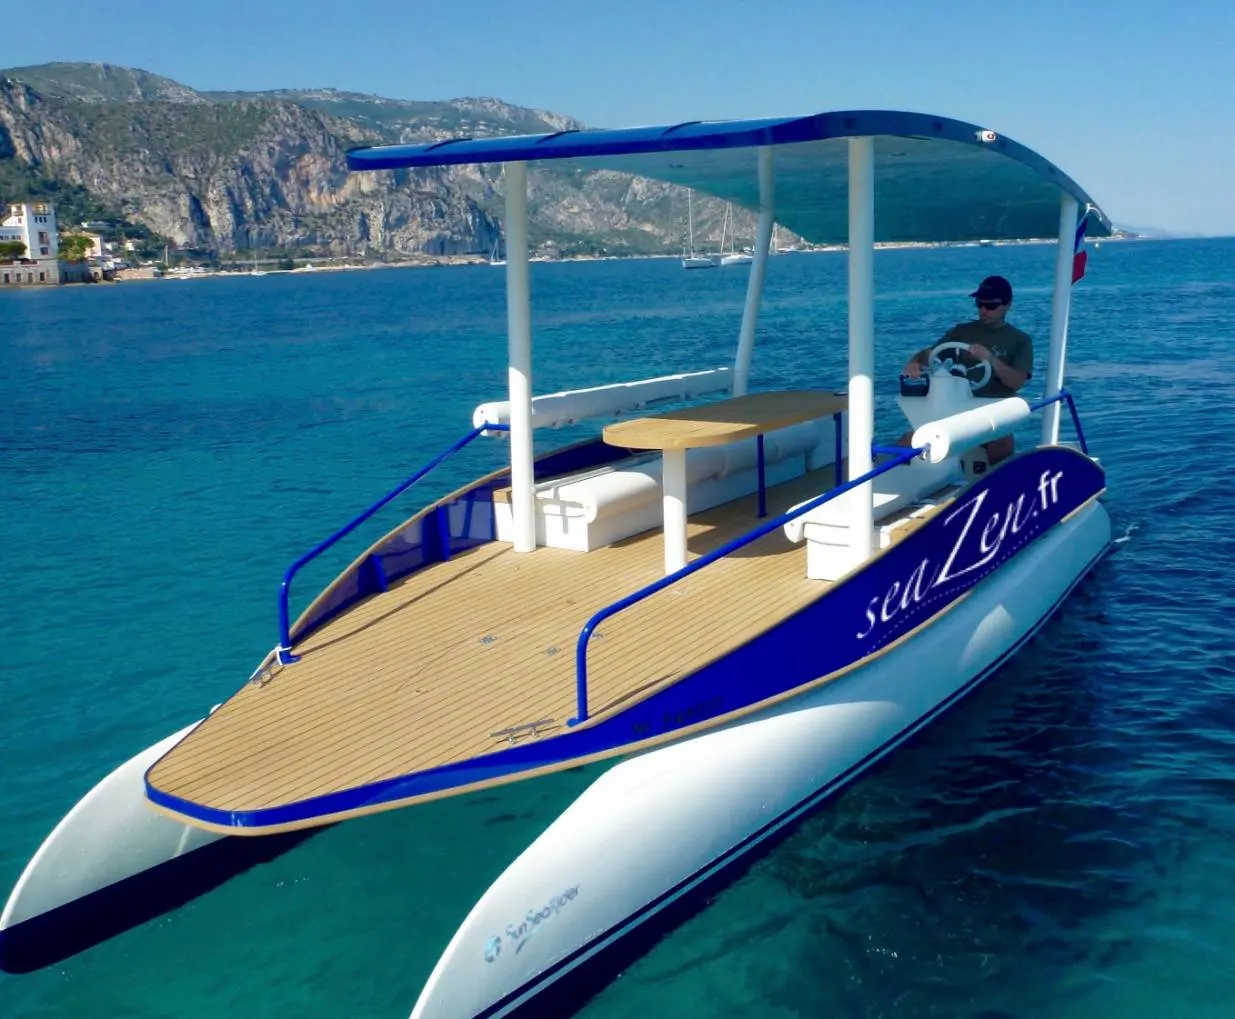 Discover the Coastline on a Solar Powered Boat